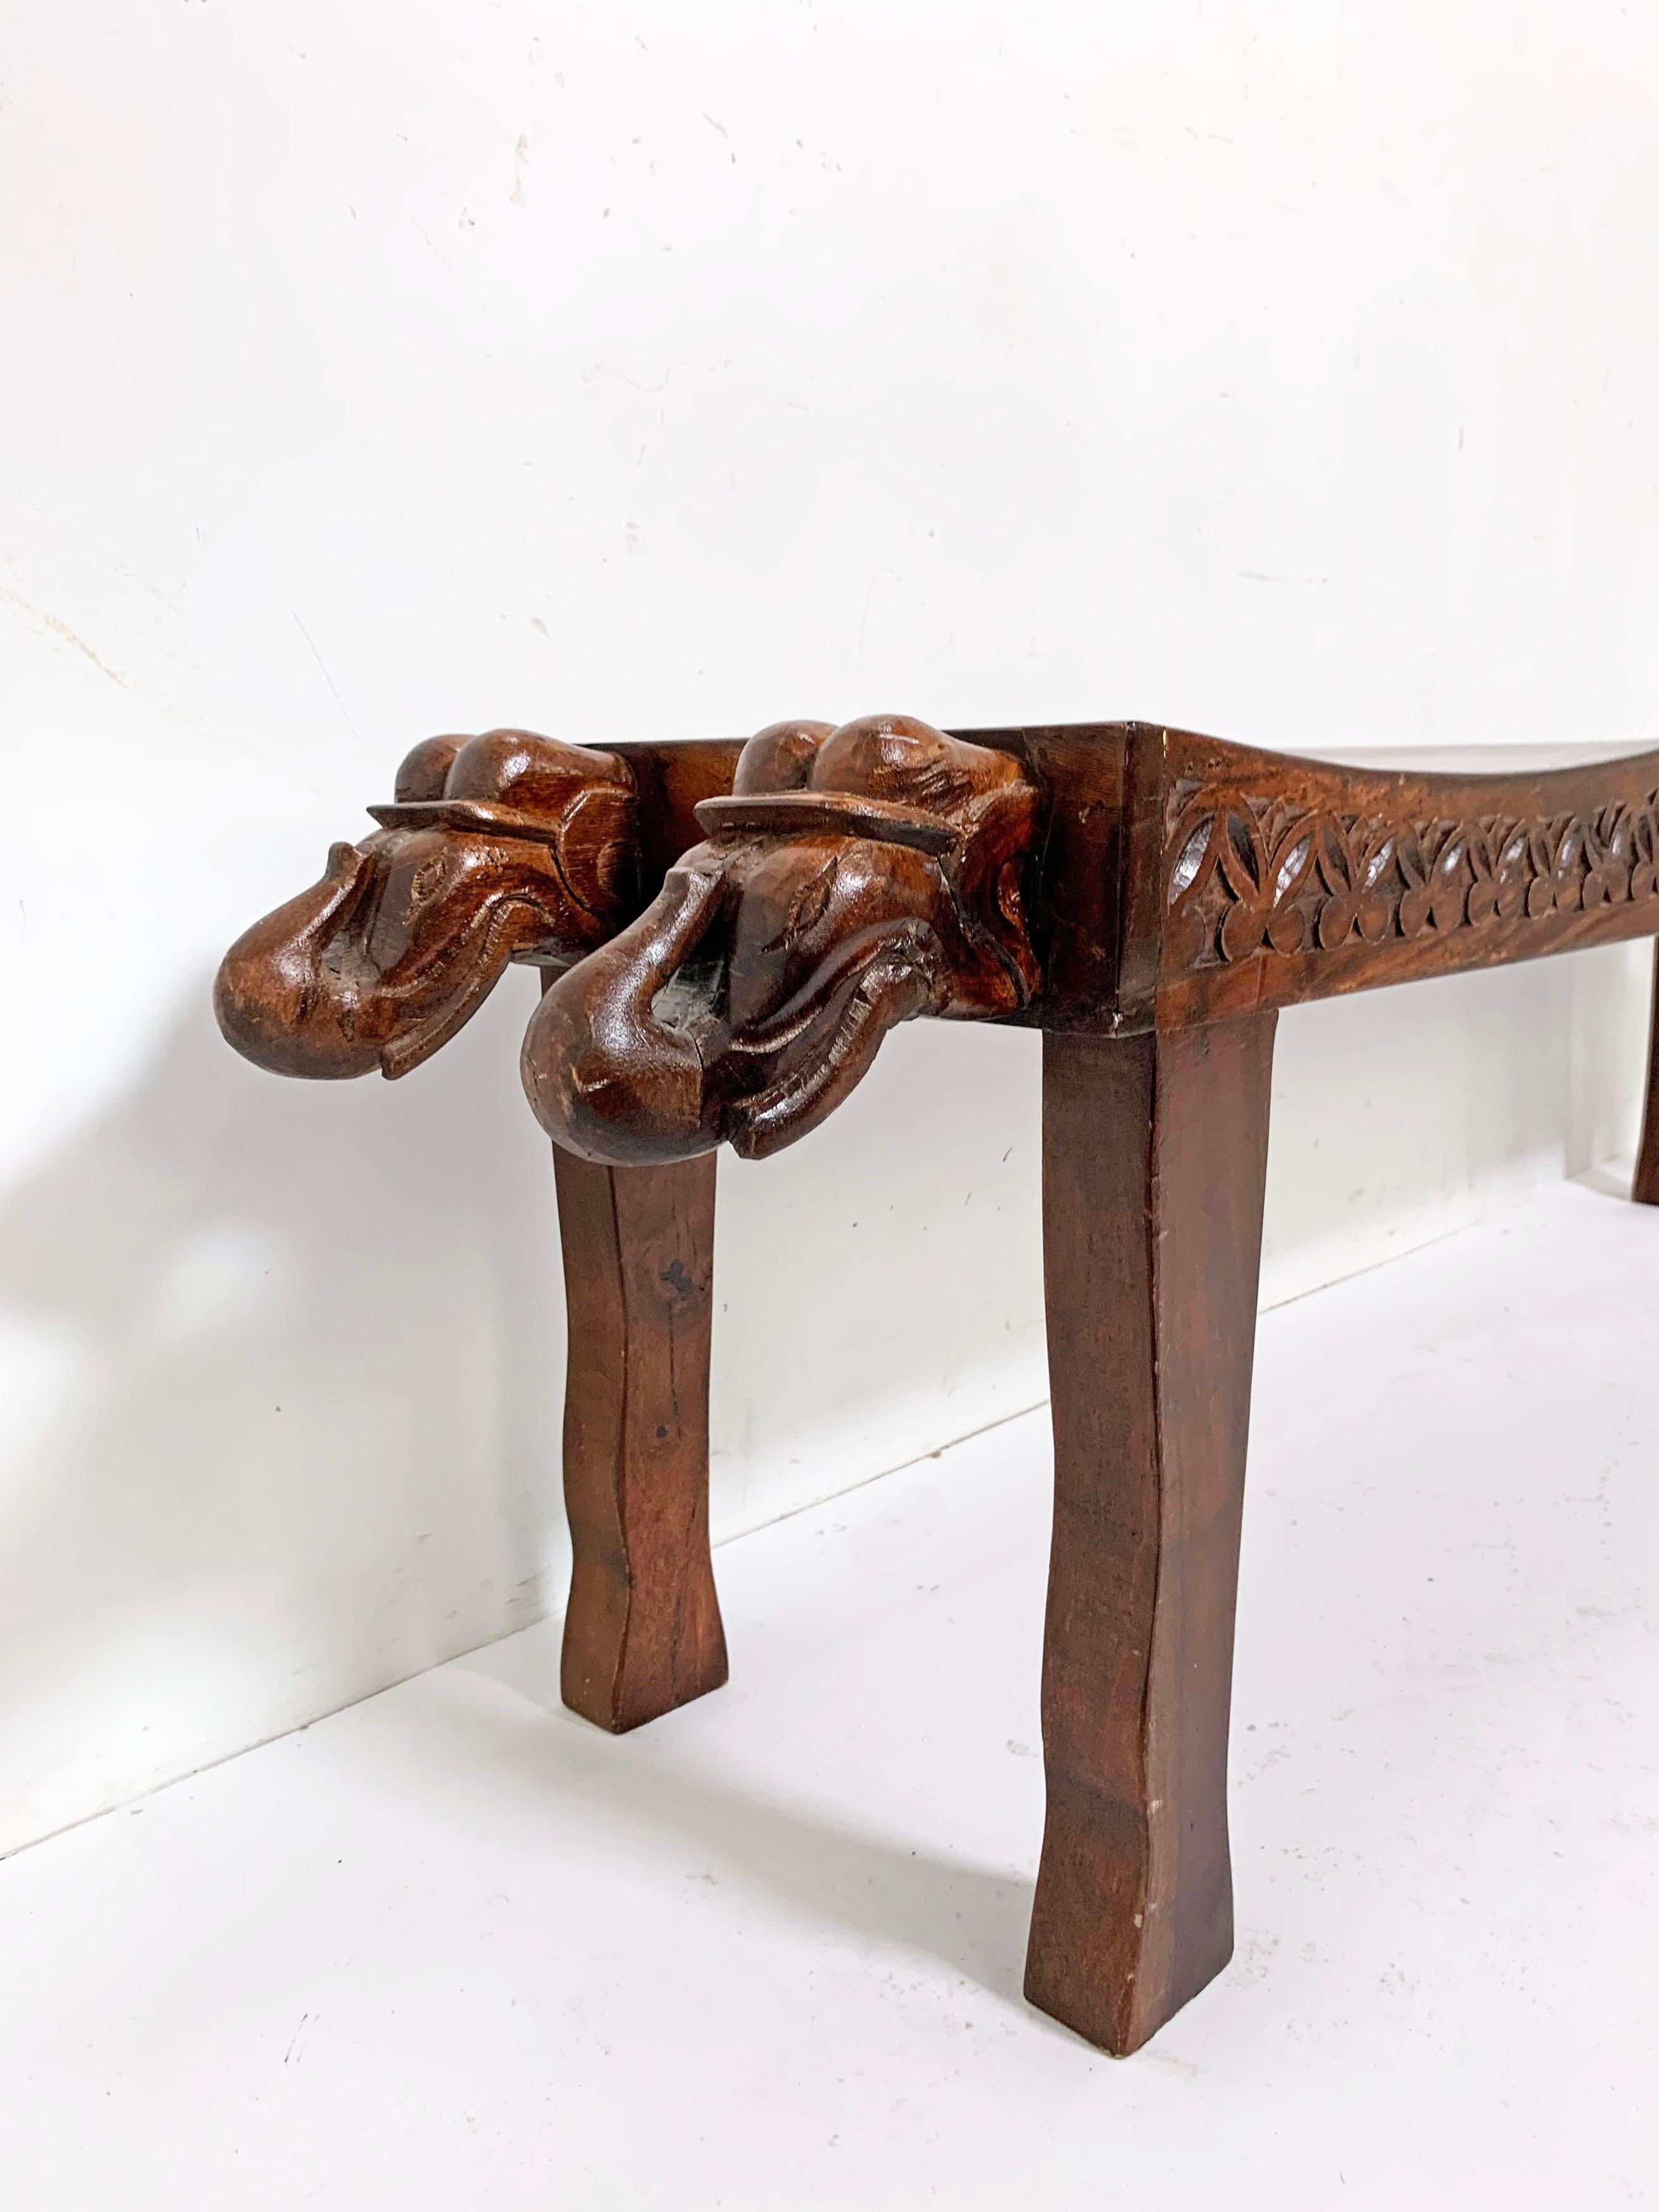 A sculpturally whimsical Anglo-Indian three-seat bench with decorative elephant head carvings at either end, circa 1970s.